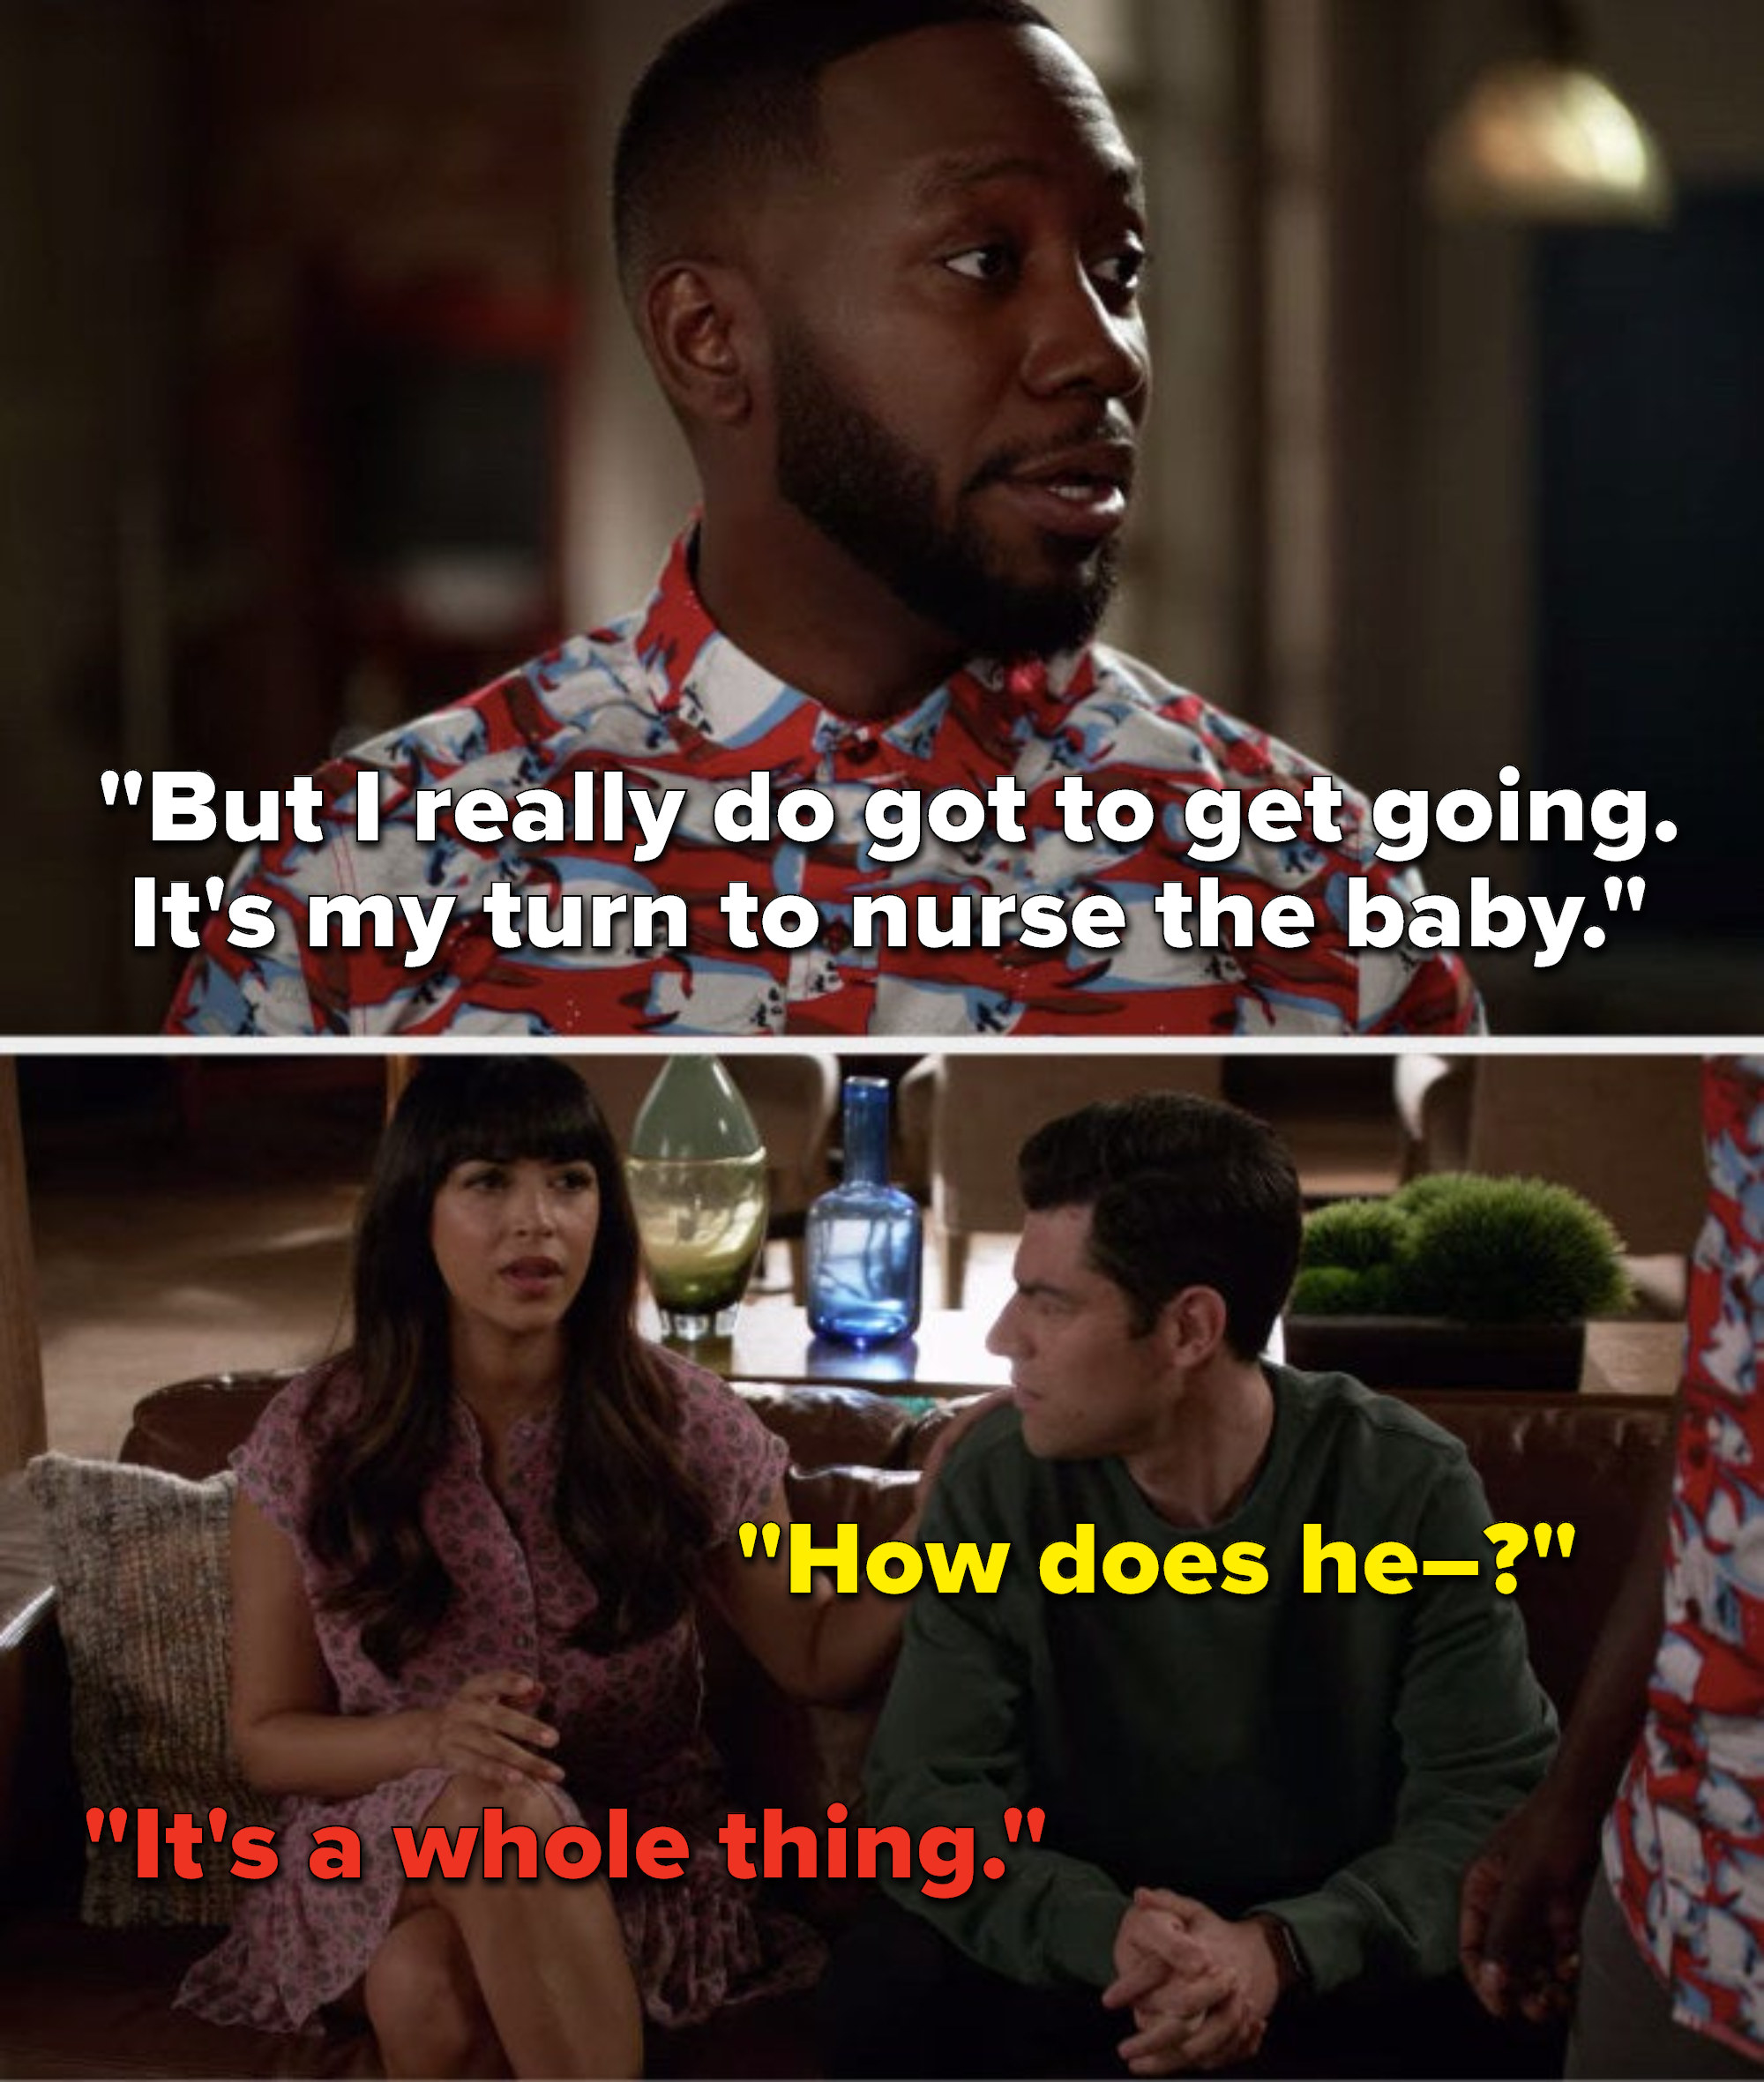 Winston says, But I really do got to get going, its my turn to nurse the baby, Schmidt asks, How does he, and Cece says, Its a whole thing